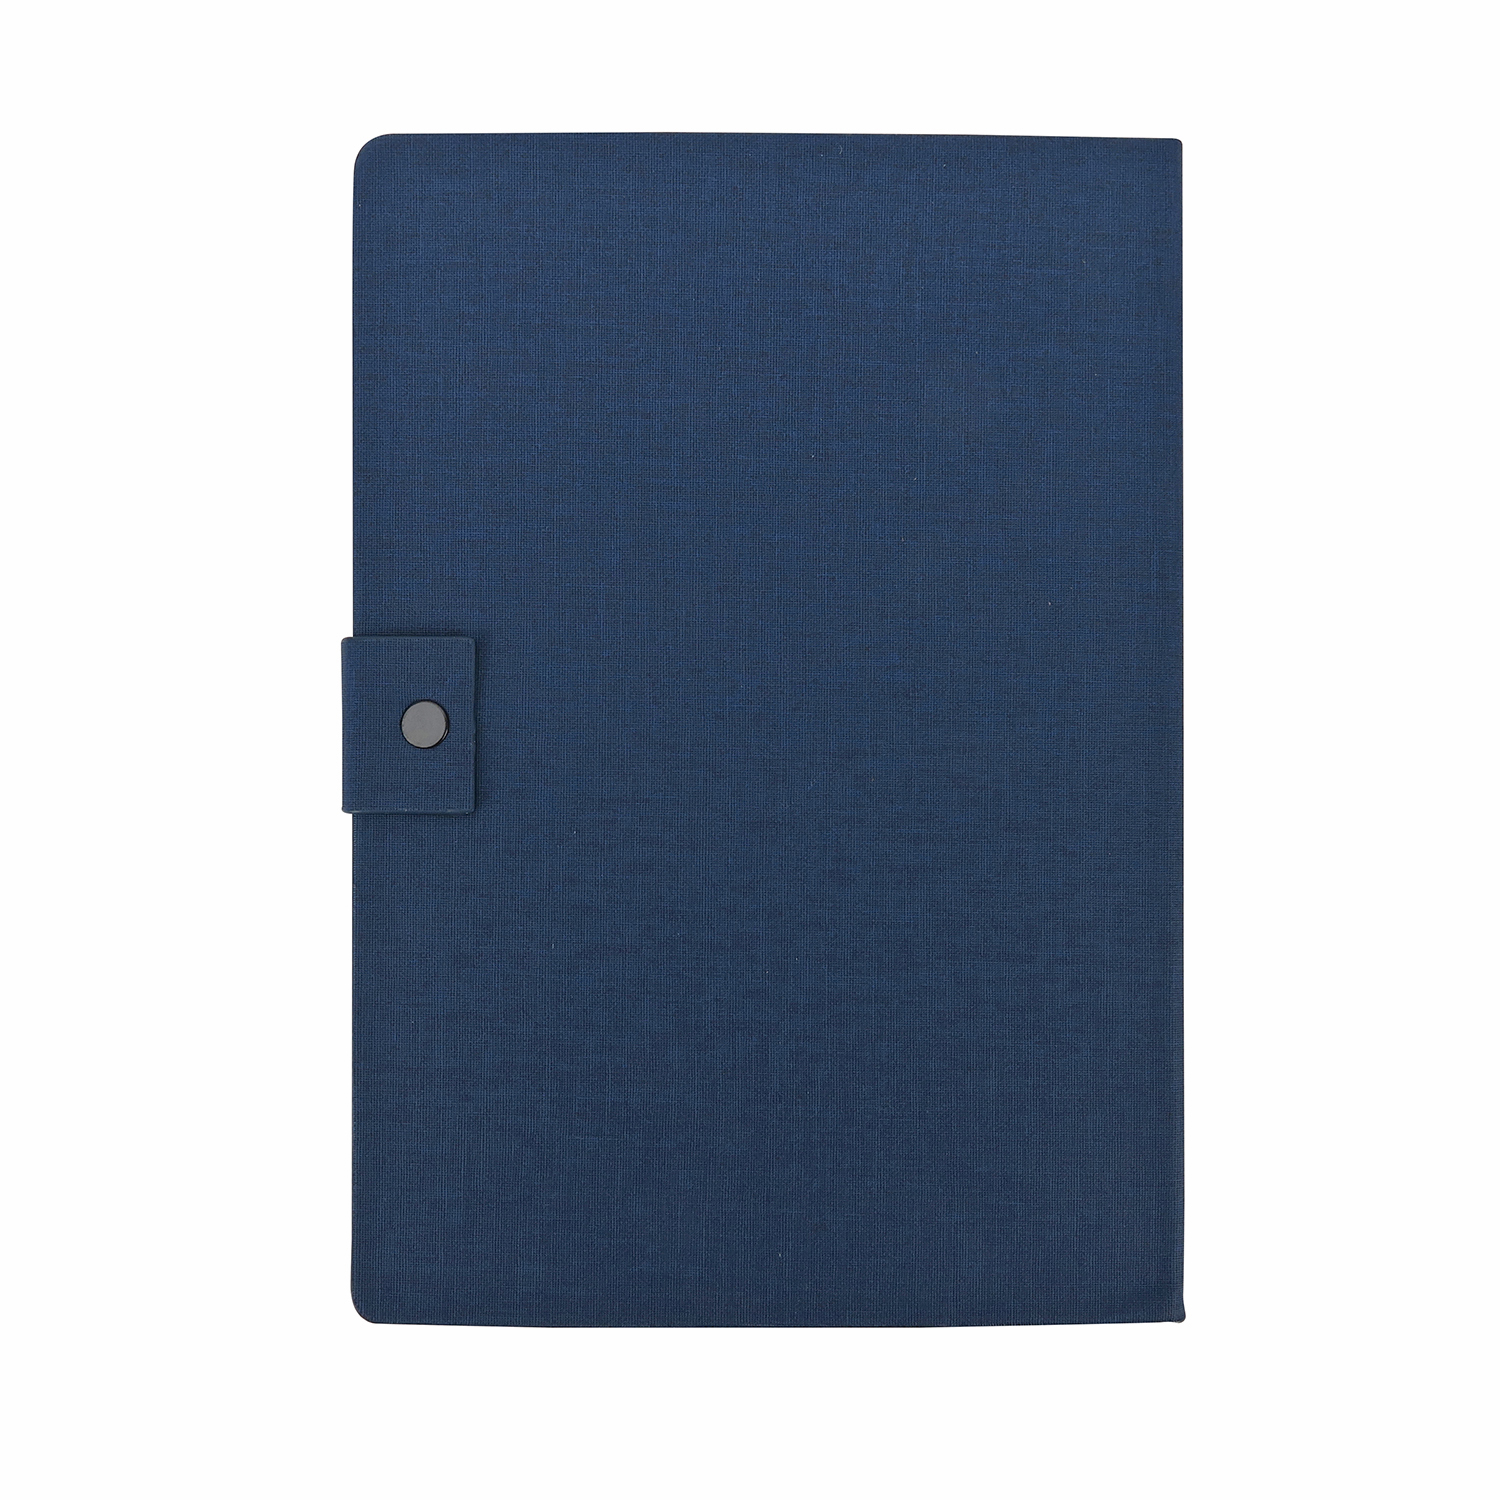 Notebook with Post It Note & Pen - Gift Idea